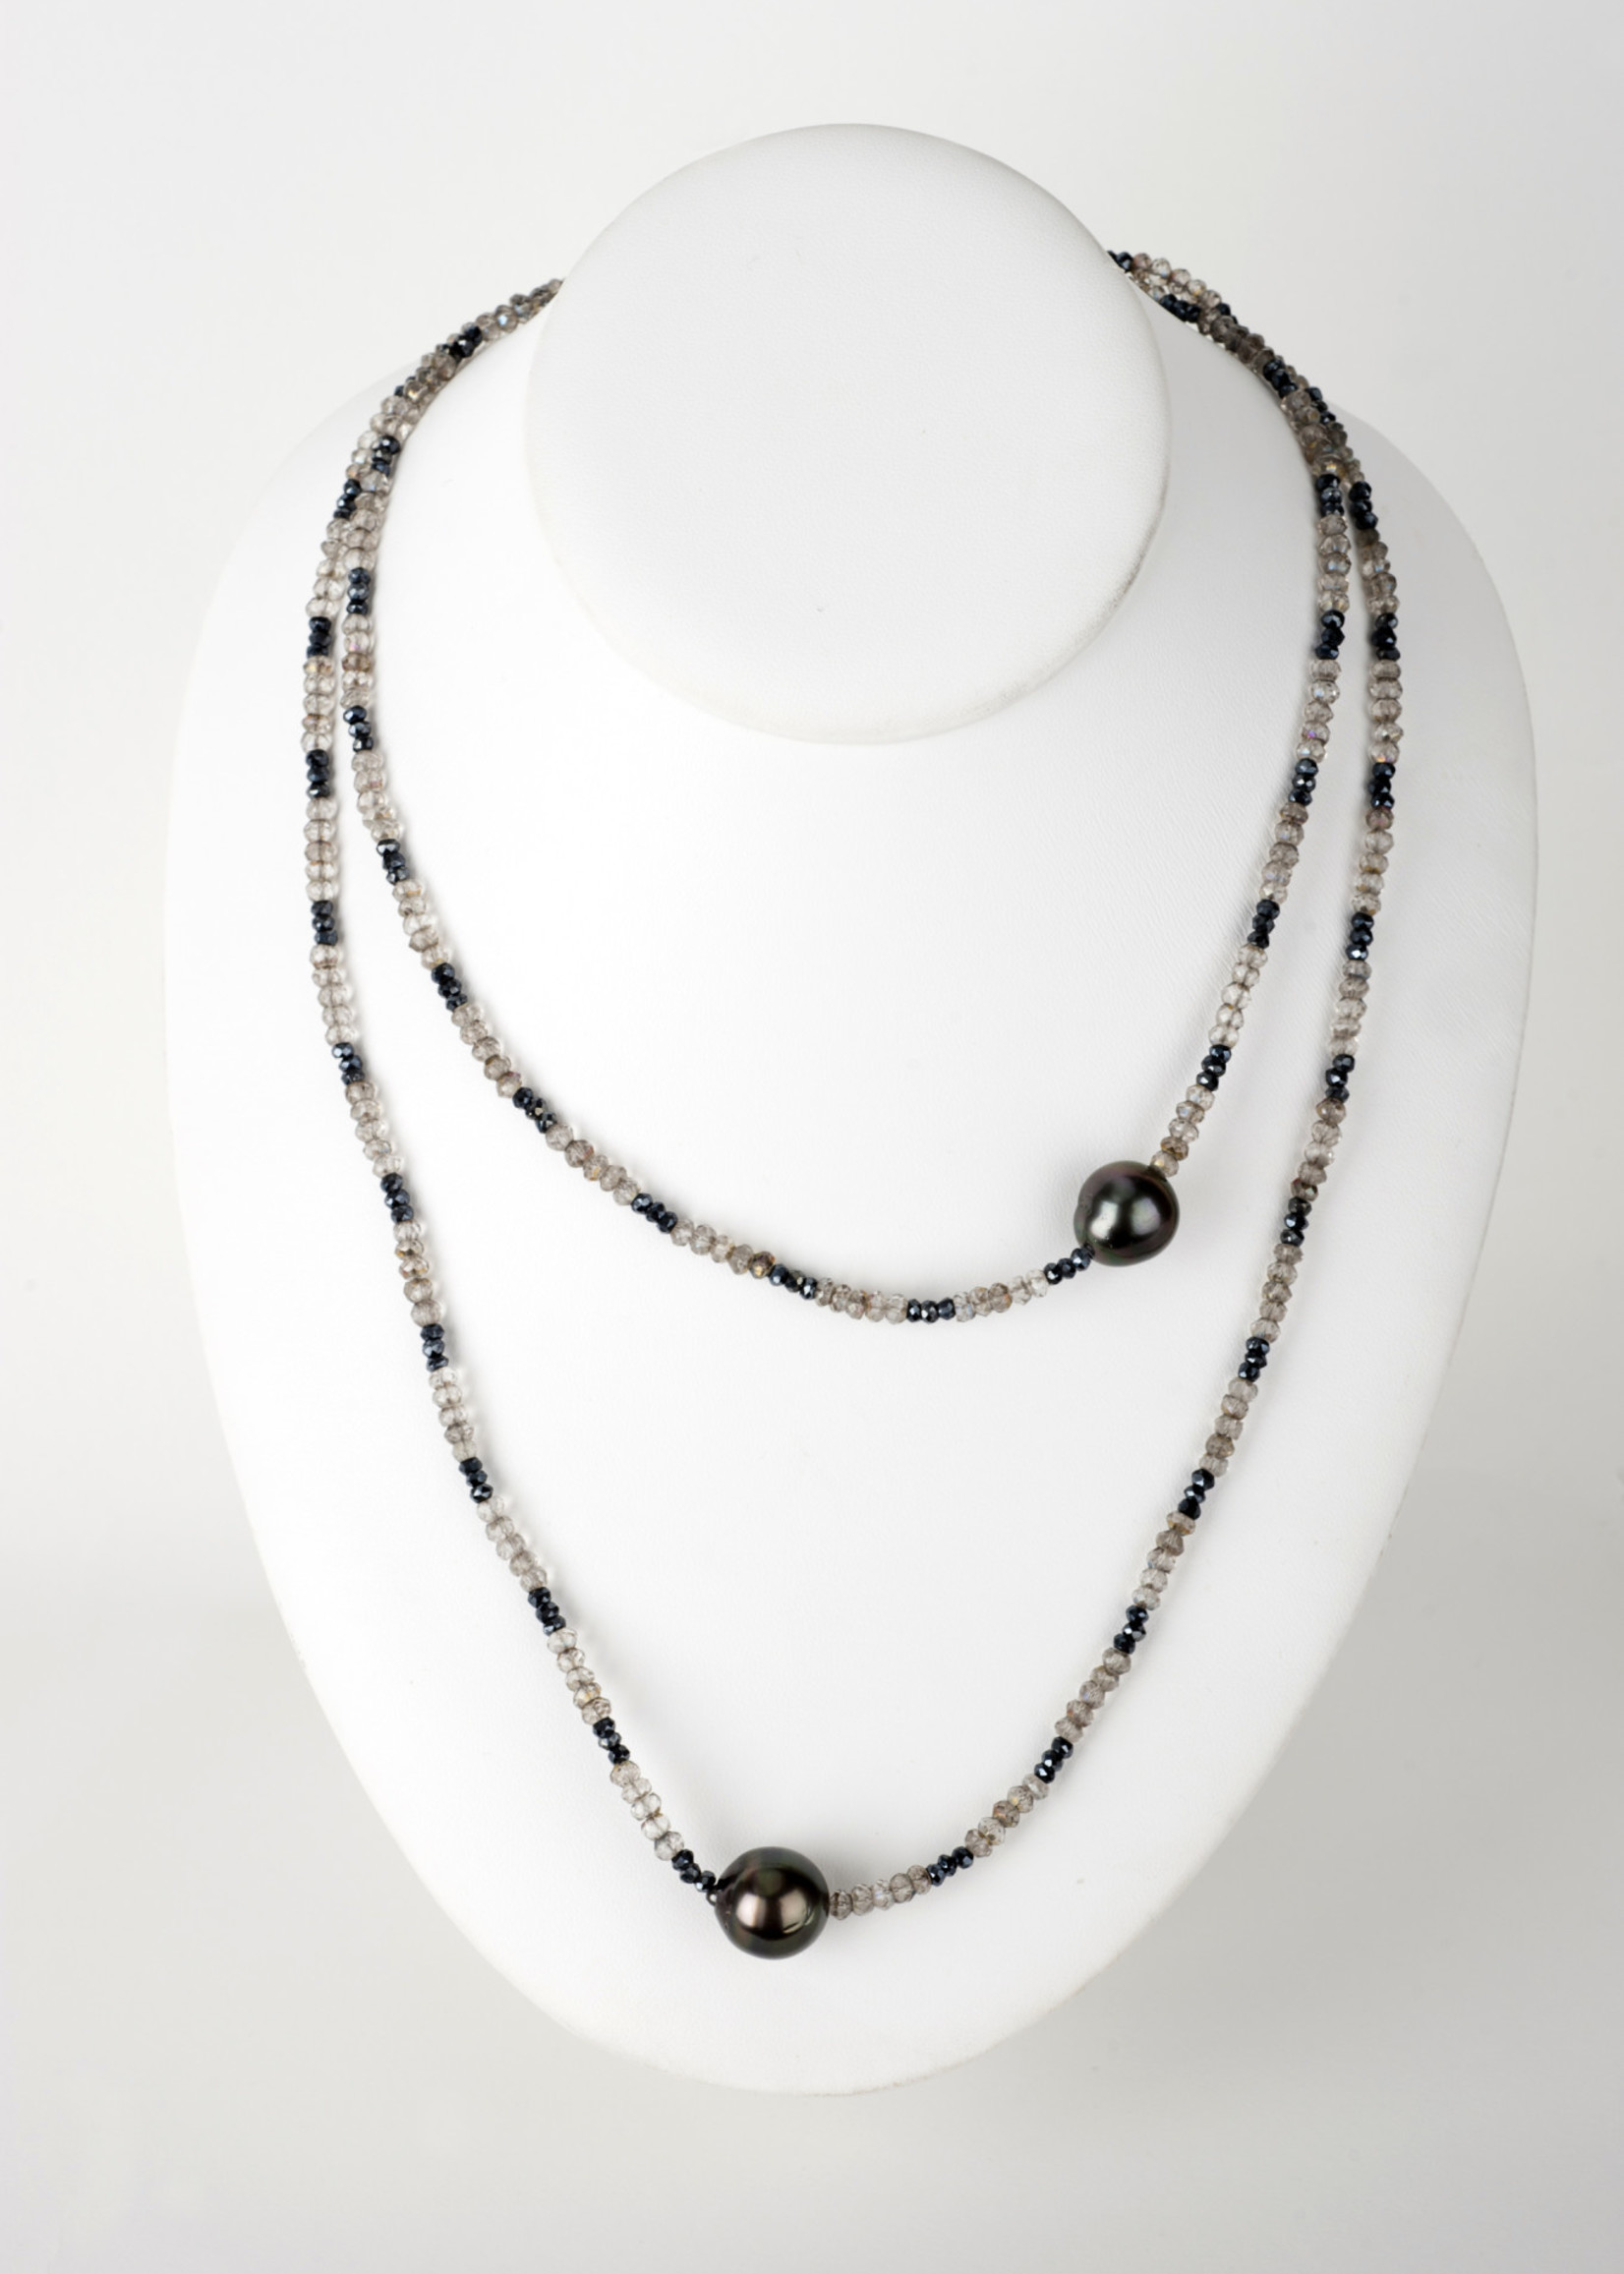 Mina Danielle Labradorite and Hematite Necklace with 2 Tahitian Pearls